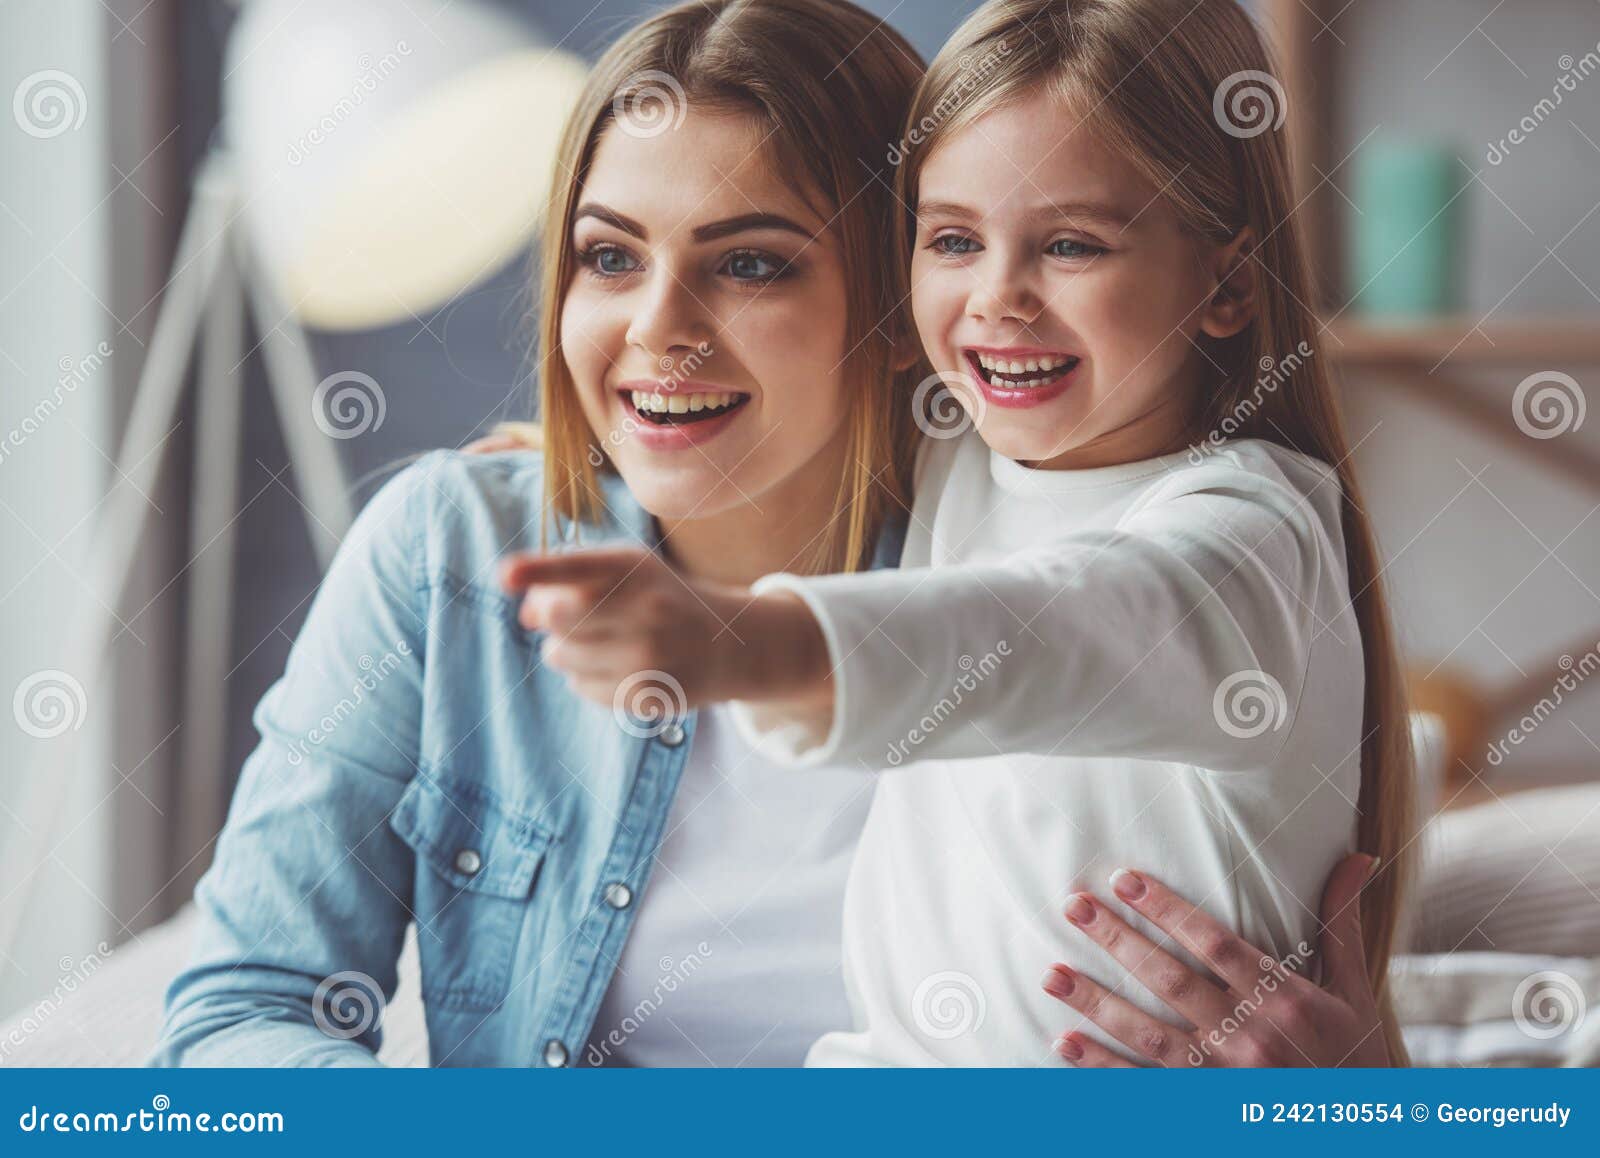 Mom and daughter stock photo. Image of natural, face - 242130554